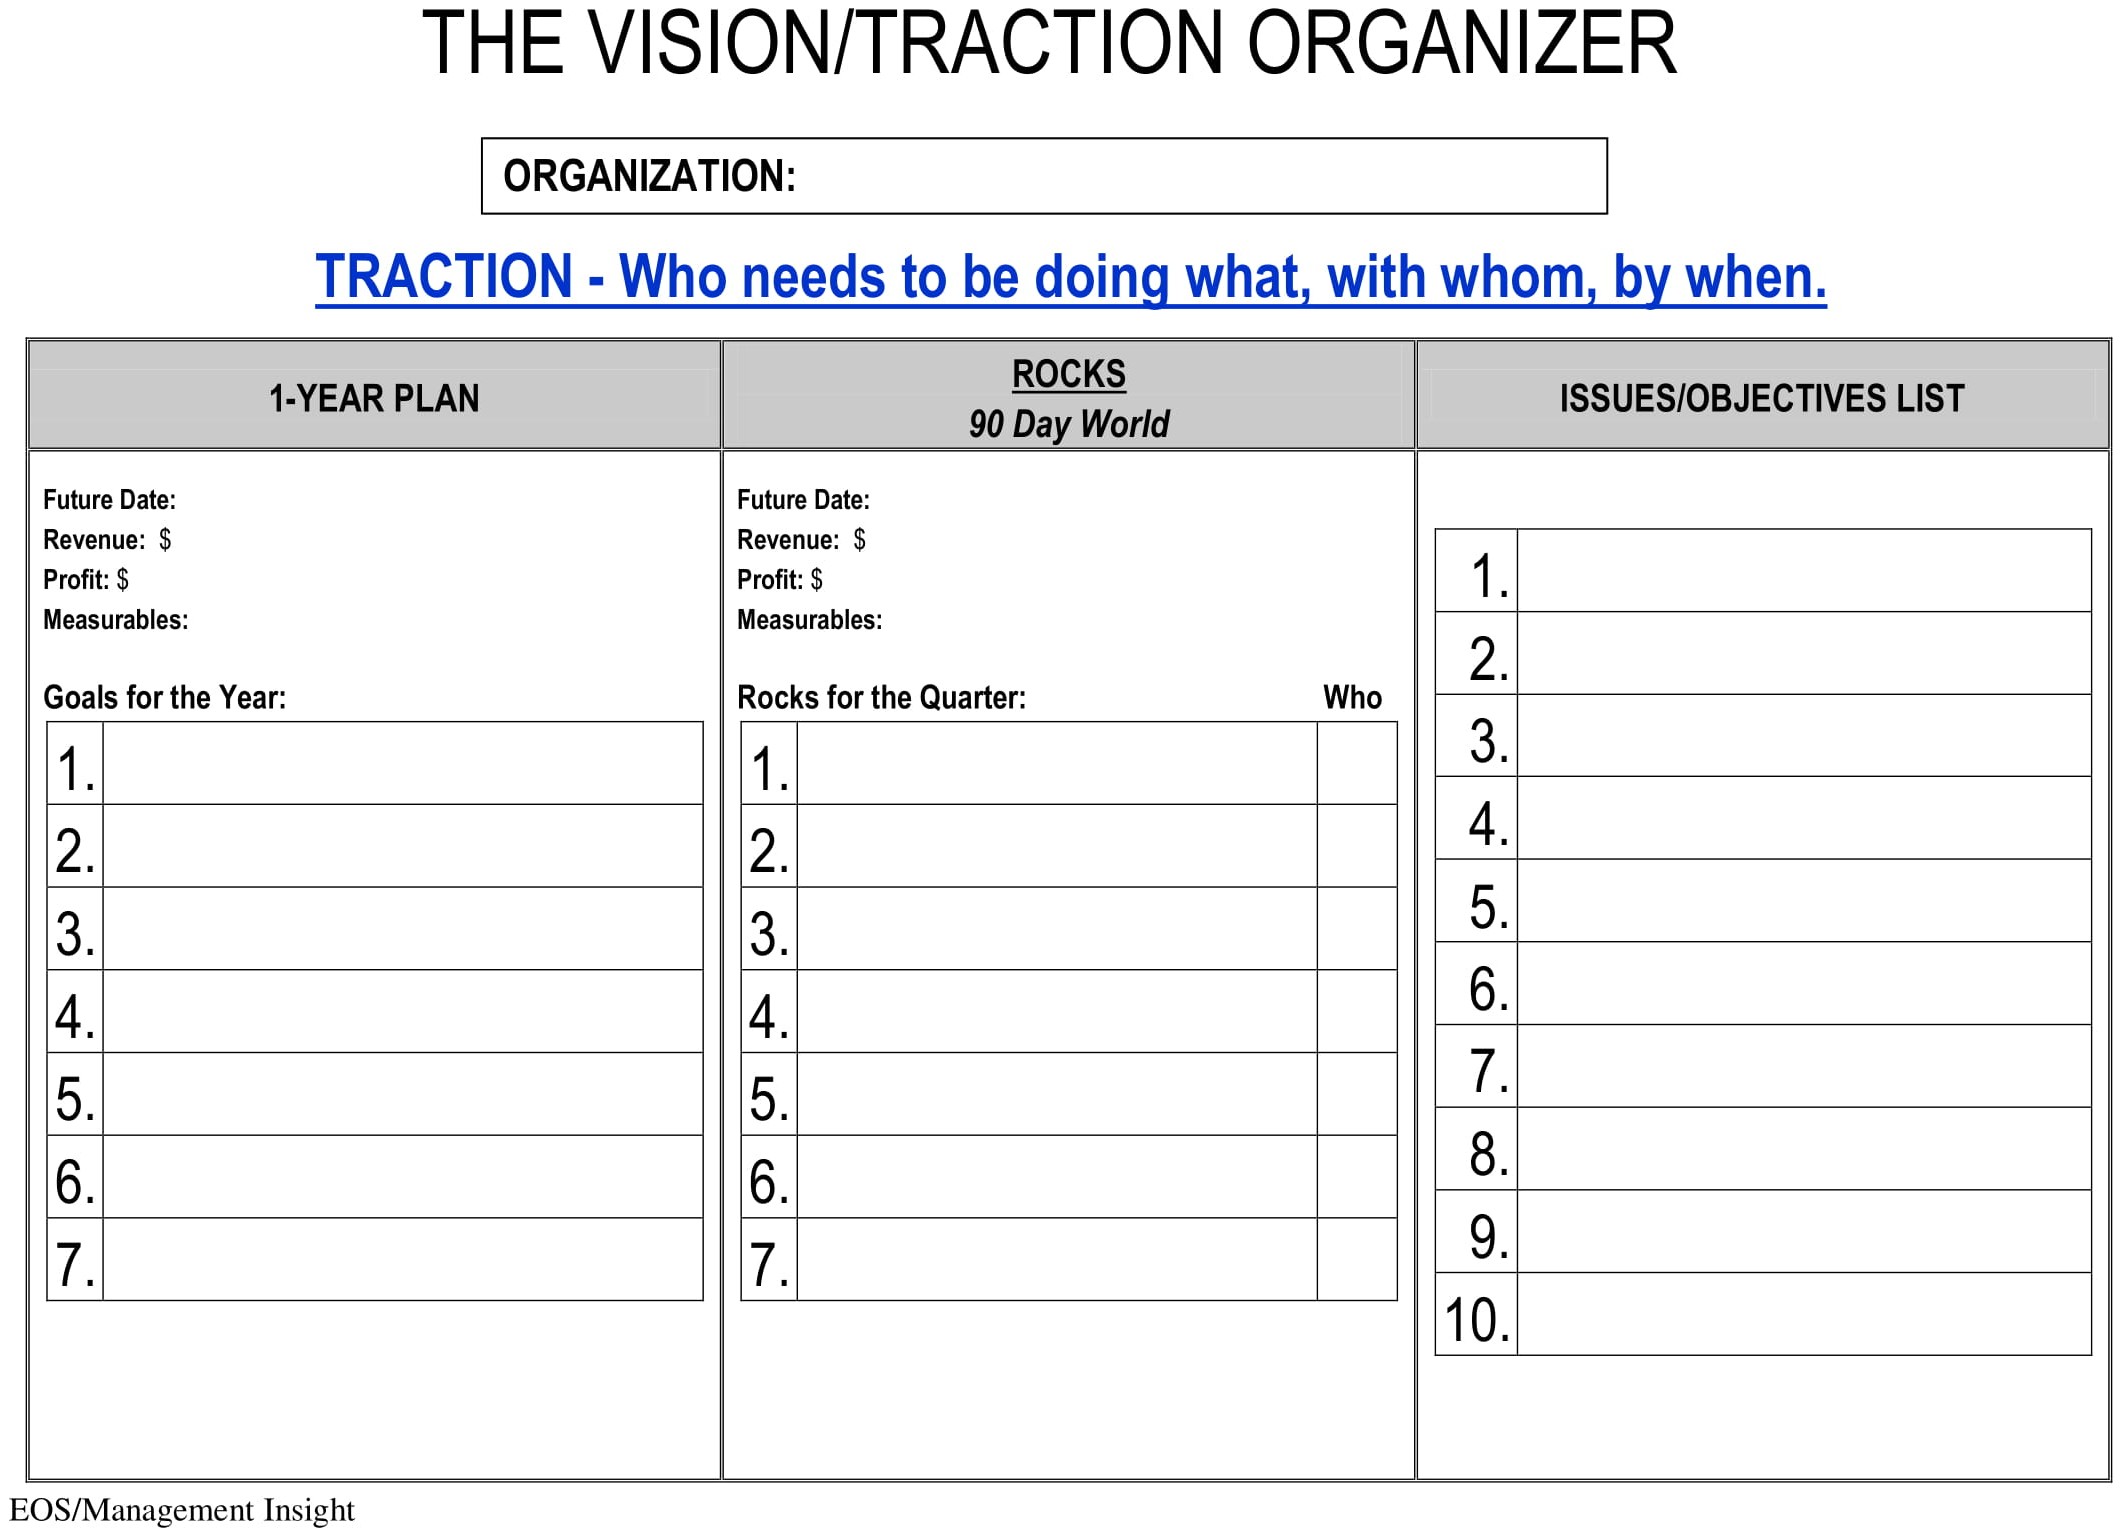 Vision/Traction Organizer Excel Template